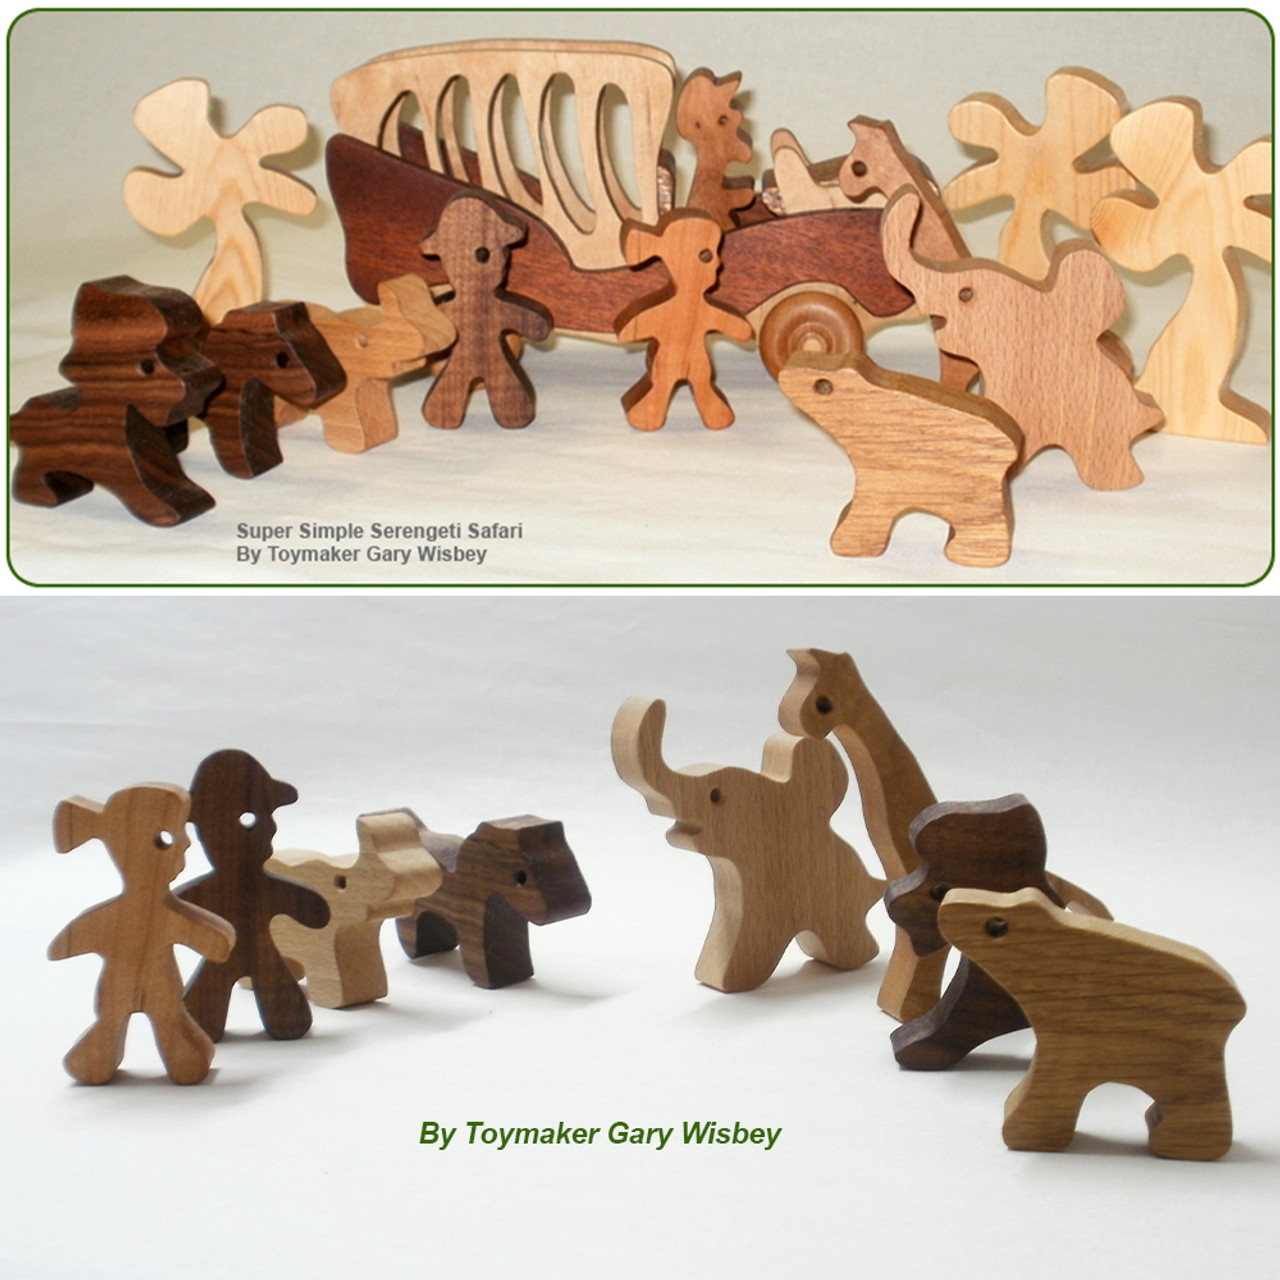 simple wooden toys plans